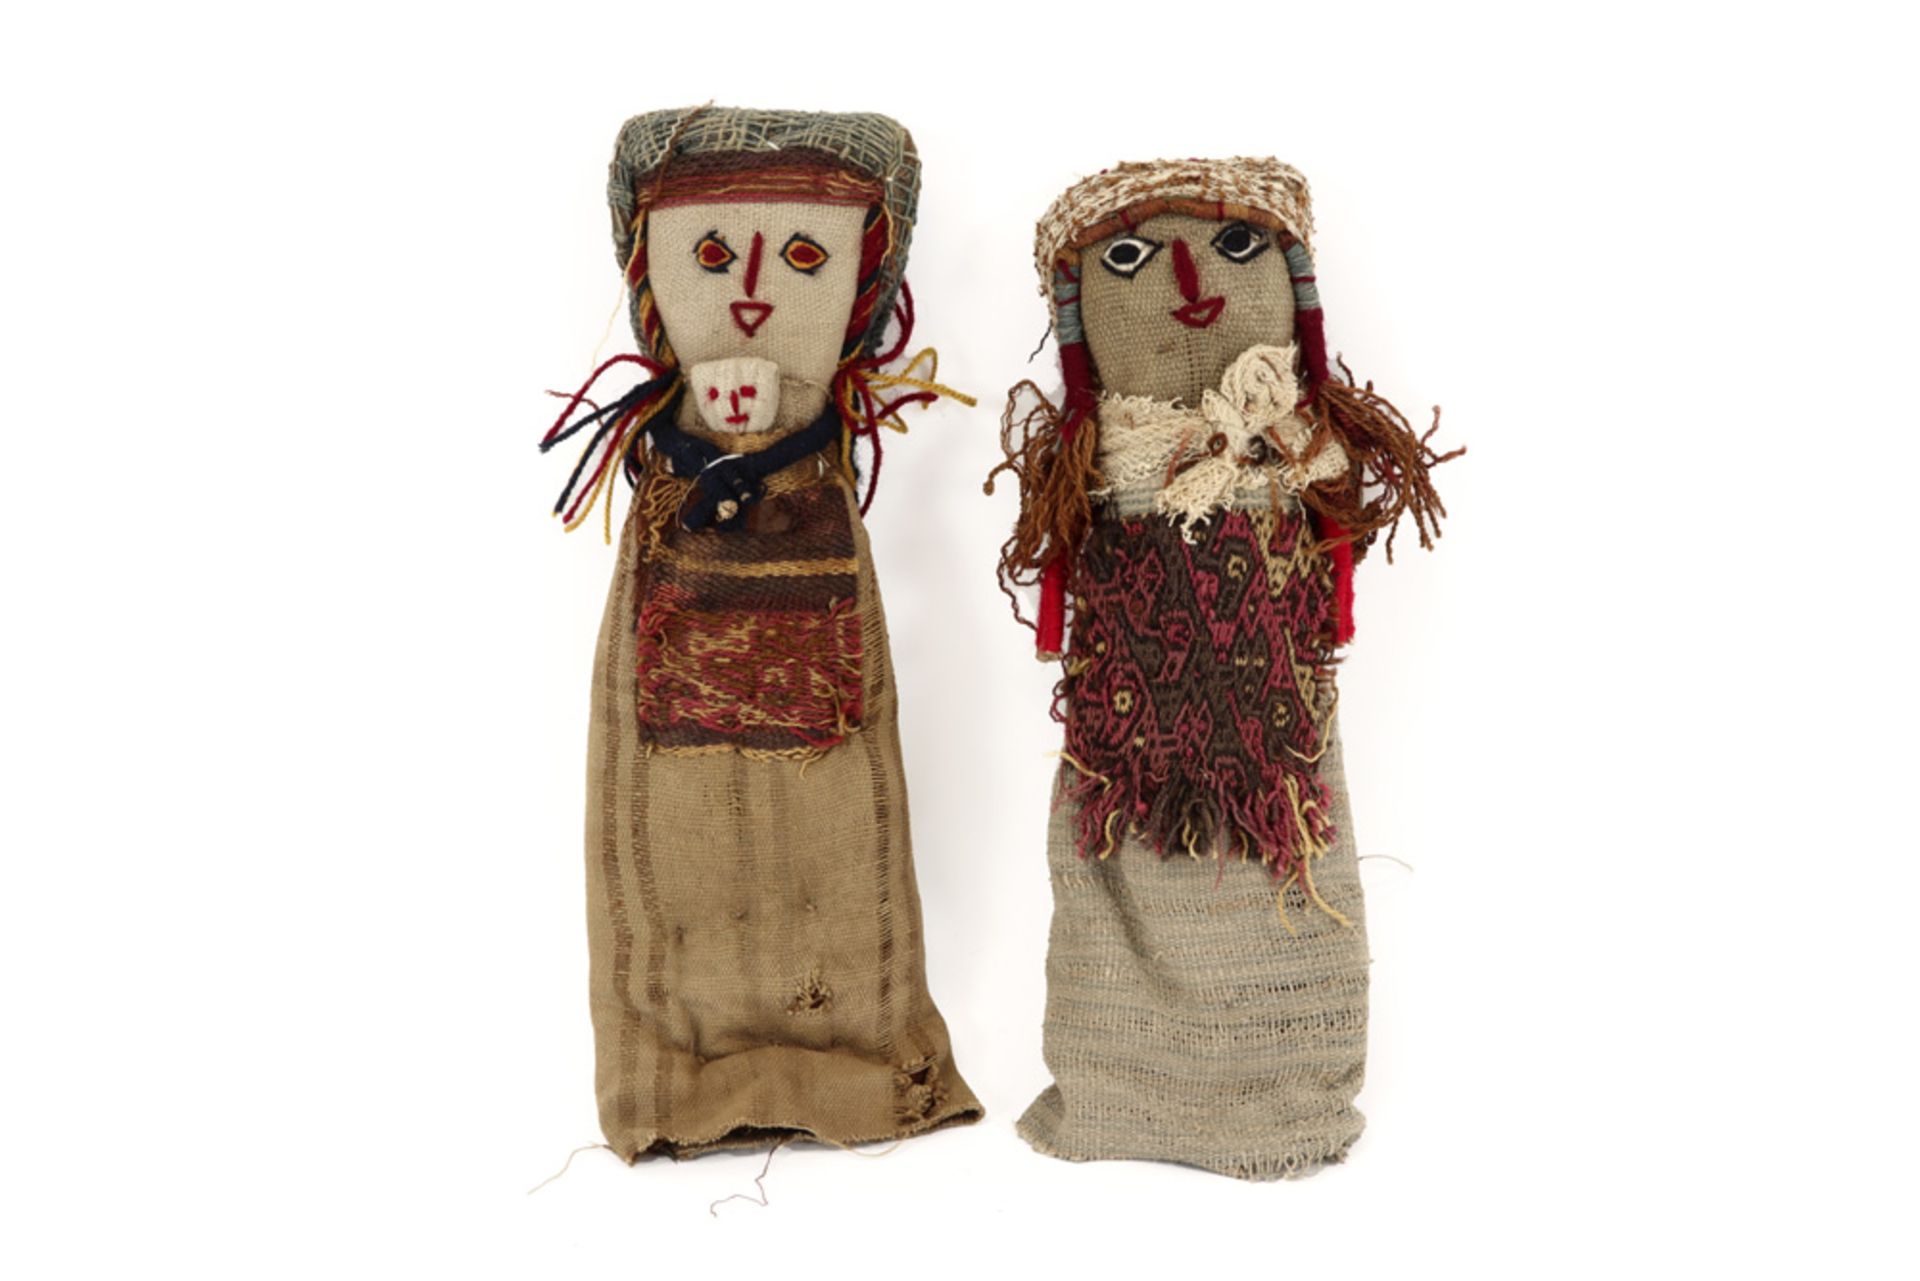 two Pre-Columbian dolls in embroided textile to be dated between 1000 and 1450 ||Twee